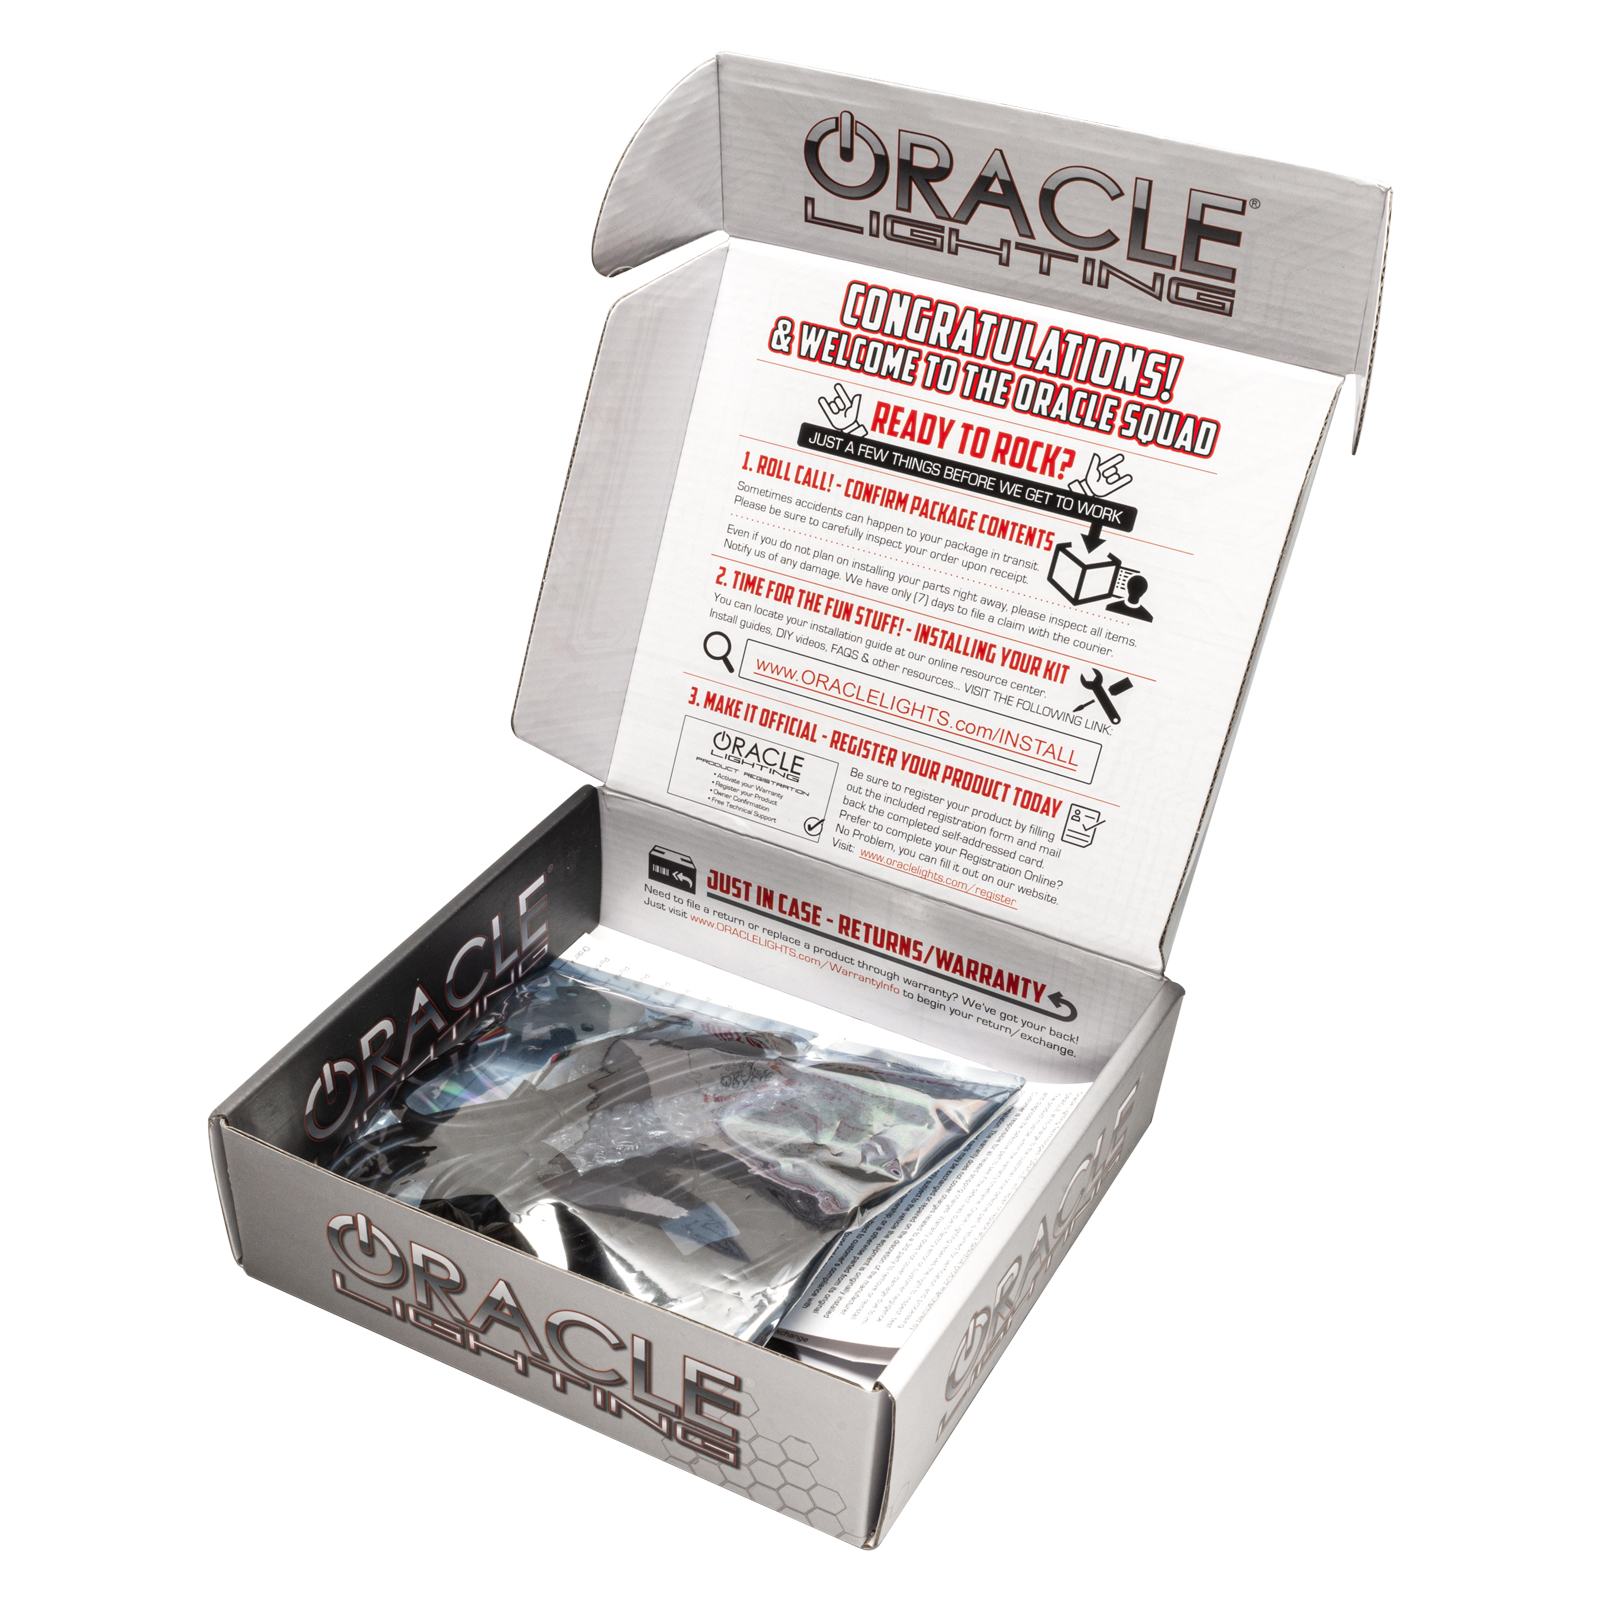 Show details for Oracle Lighting 3626504 Drl Rectifier